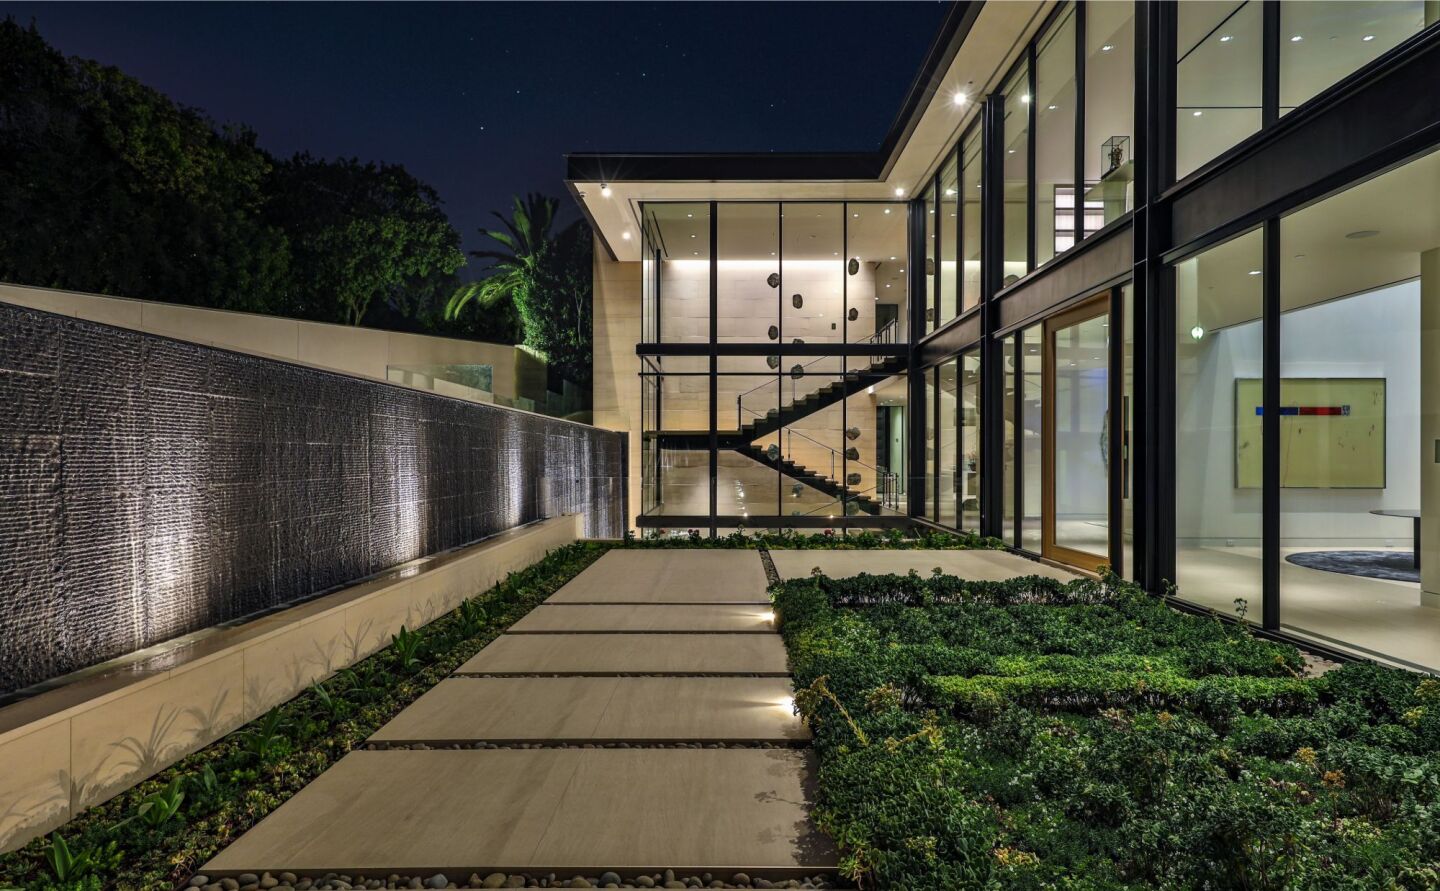 The entry walkway leading to a glass-walled home.